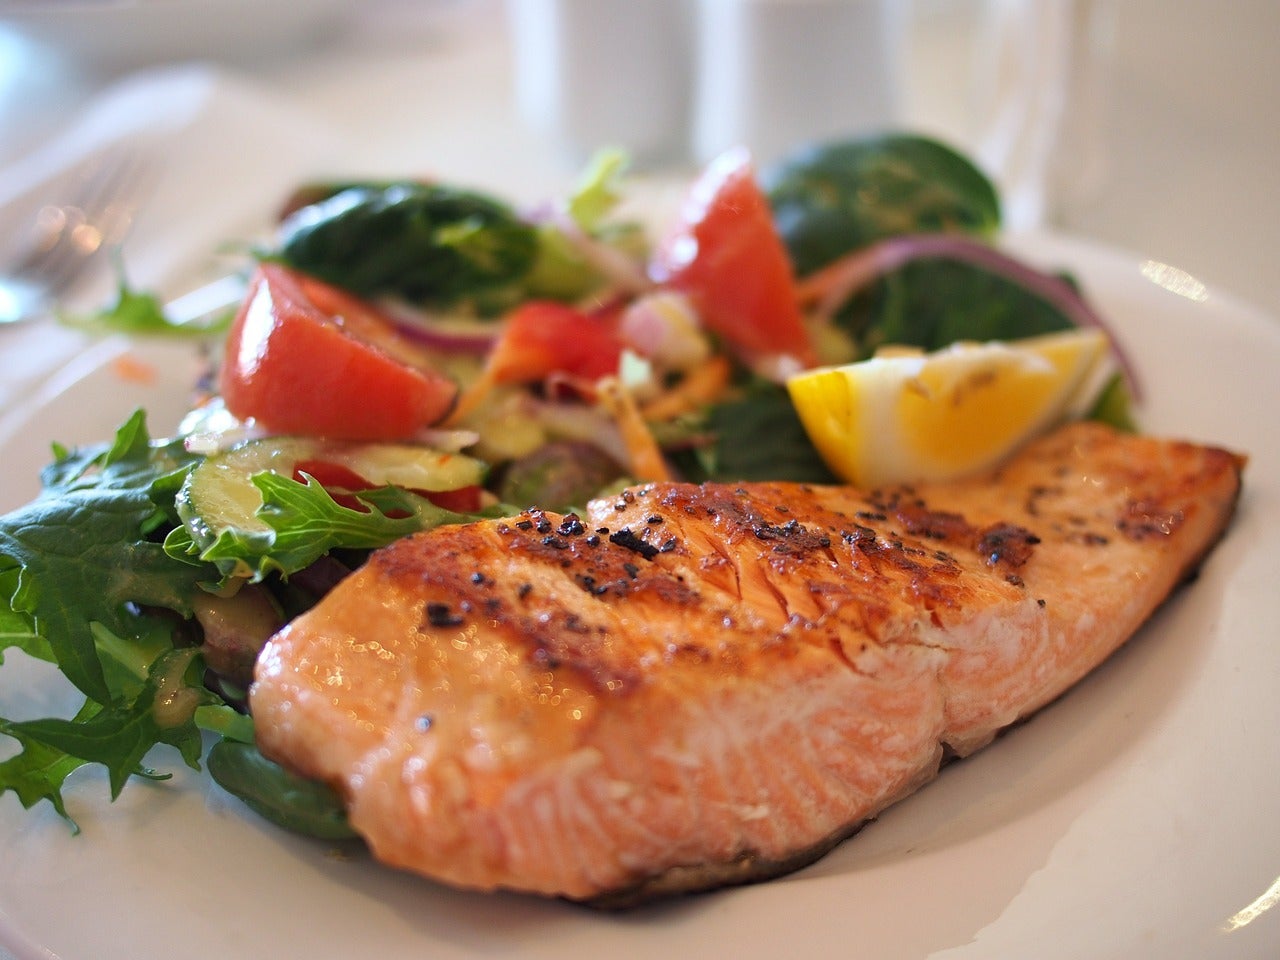 meal on a plate, salmon and salad